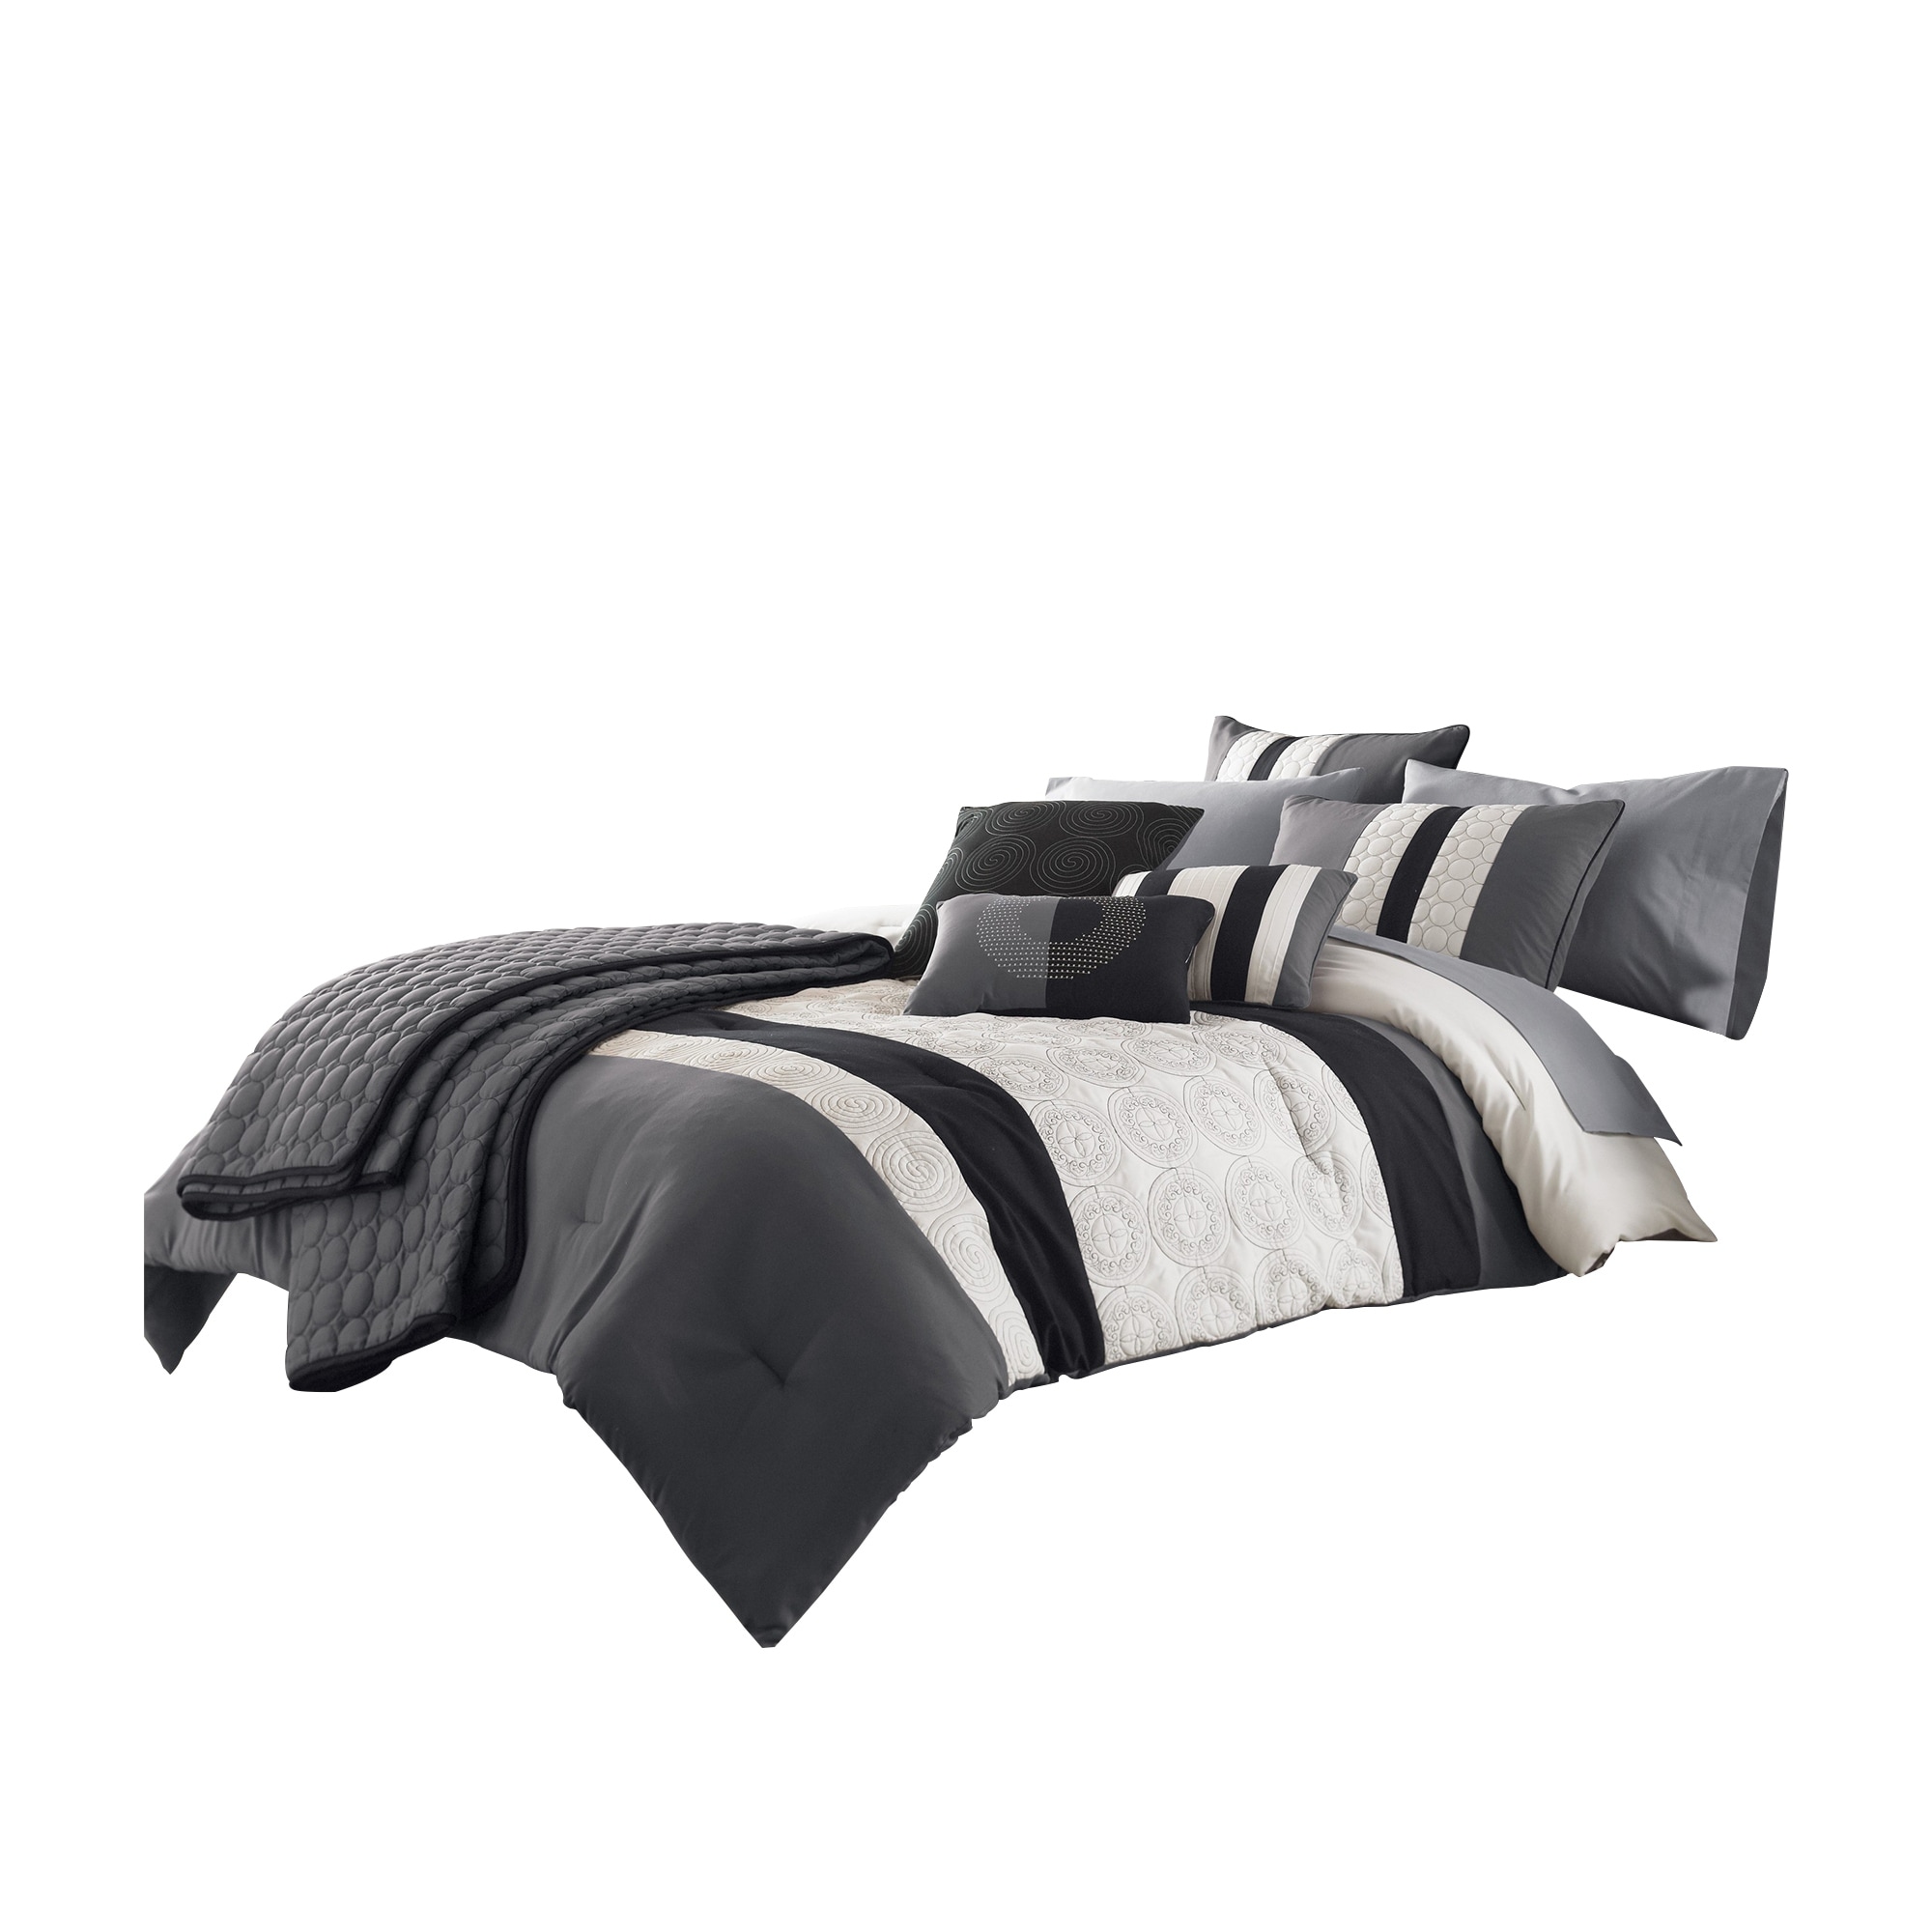 7 Piece Queen Cotton Comforter Set With Geometric Print Gray And Black Overstock 32006680